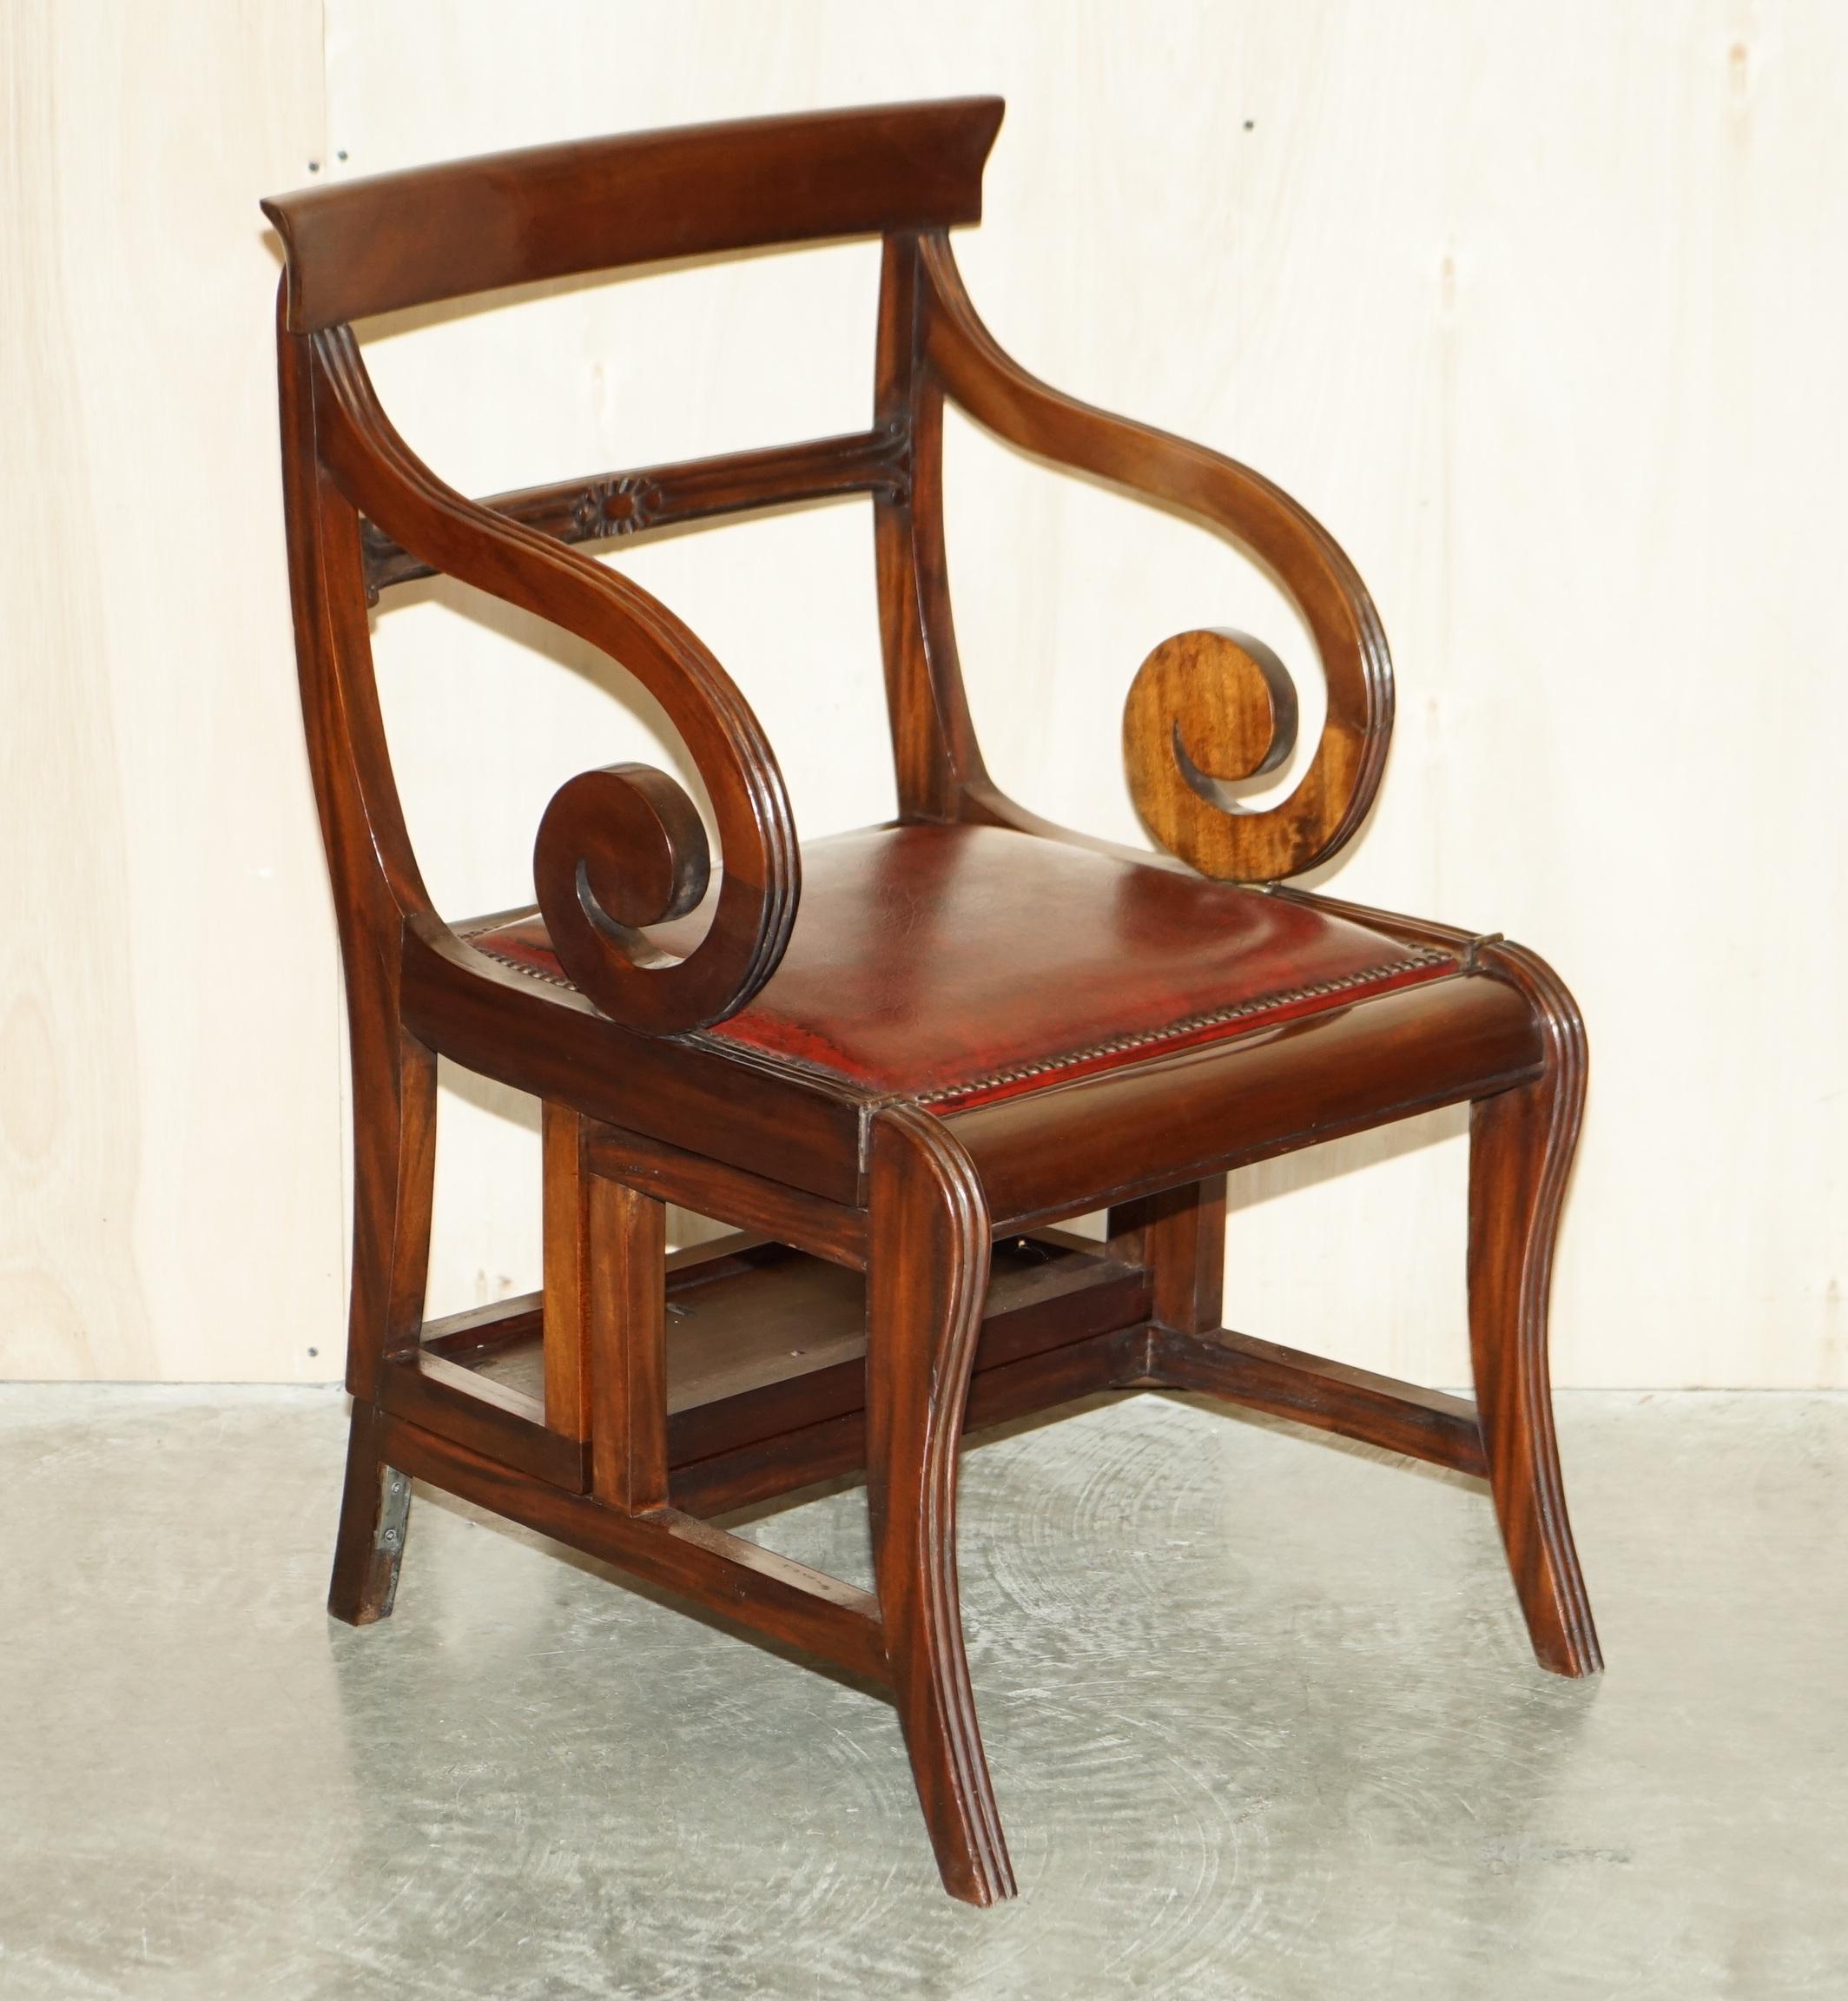 We are delighted to offer this very large and collectable fully restored Regency circa 1810-1820 metamorphic armchair which converts into Library steps after the original 18th century design by Gillows of Lancaster.

This wonderful piece of English